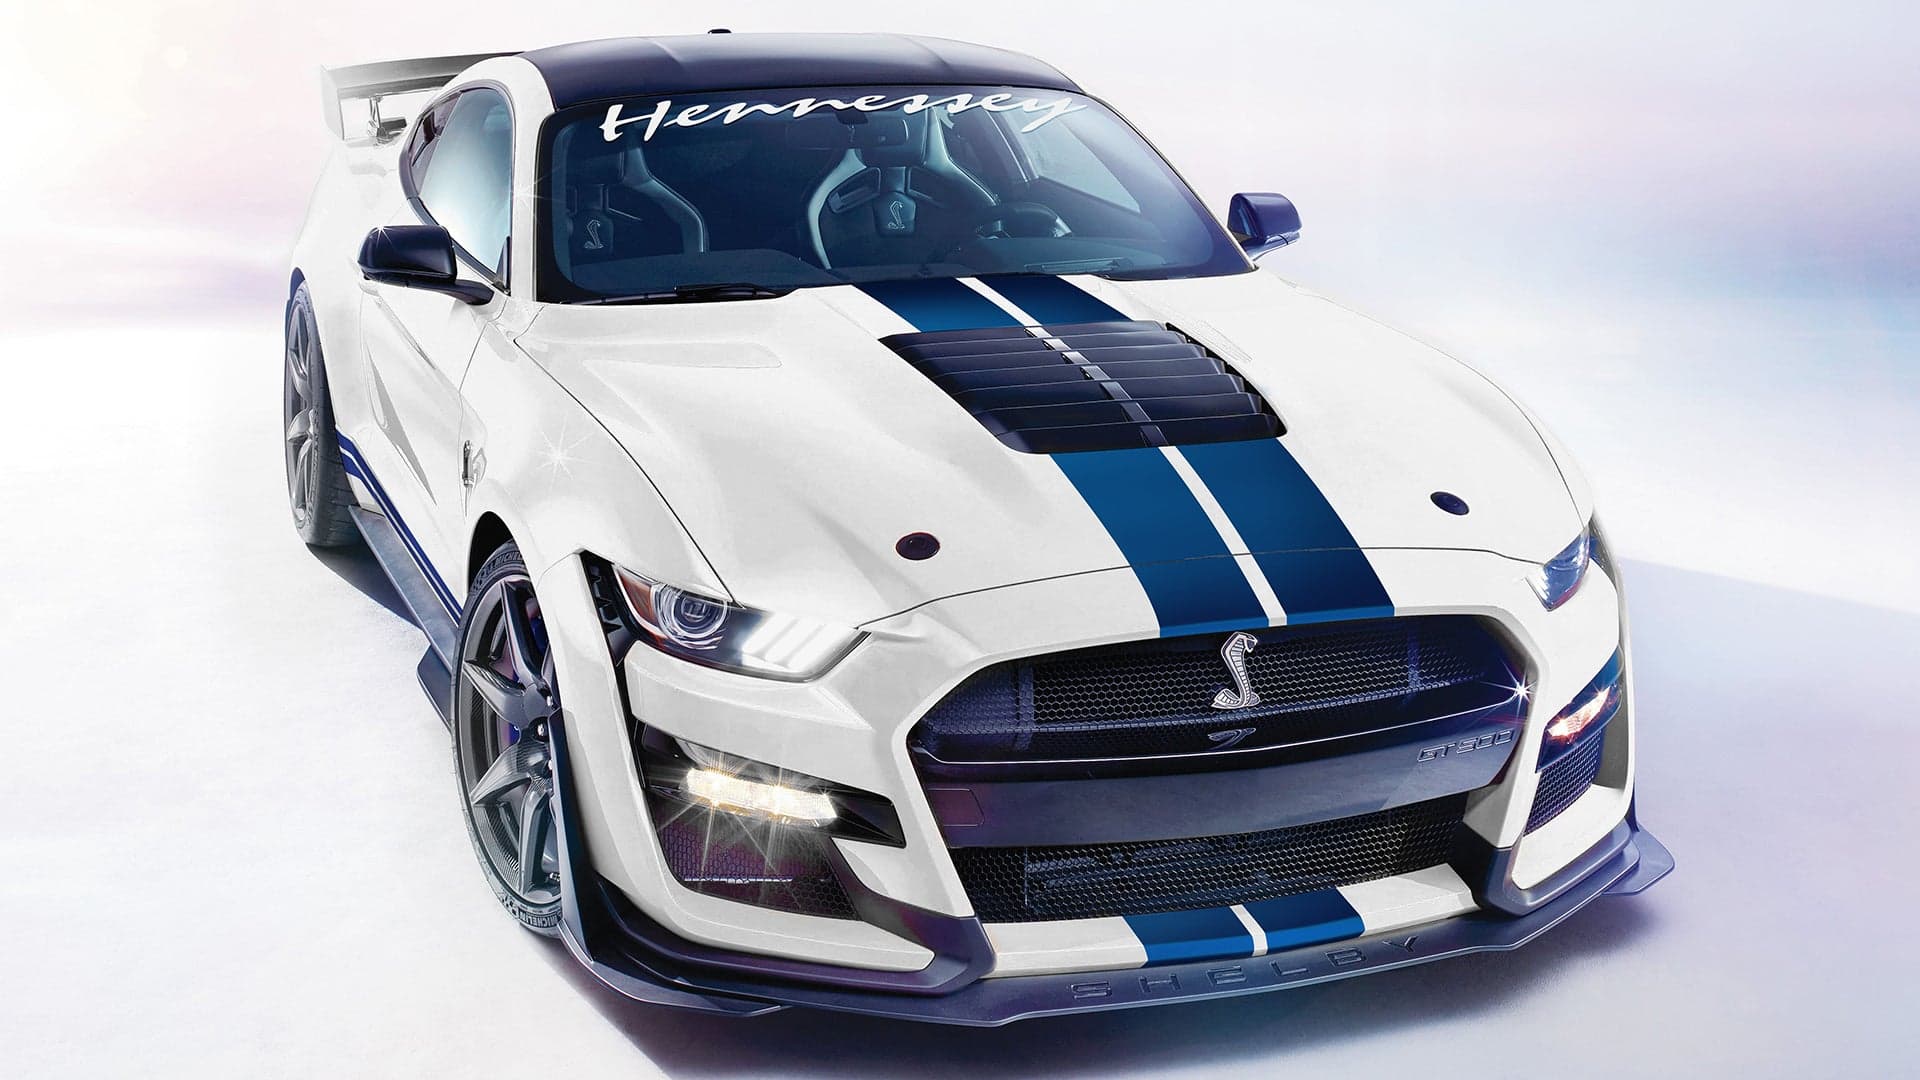 Hennessey Upgrade Bumps 2020 Ford Mustang Shelby GT500 to Colossal 1,200-HP Mark